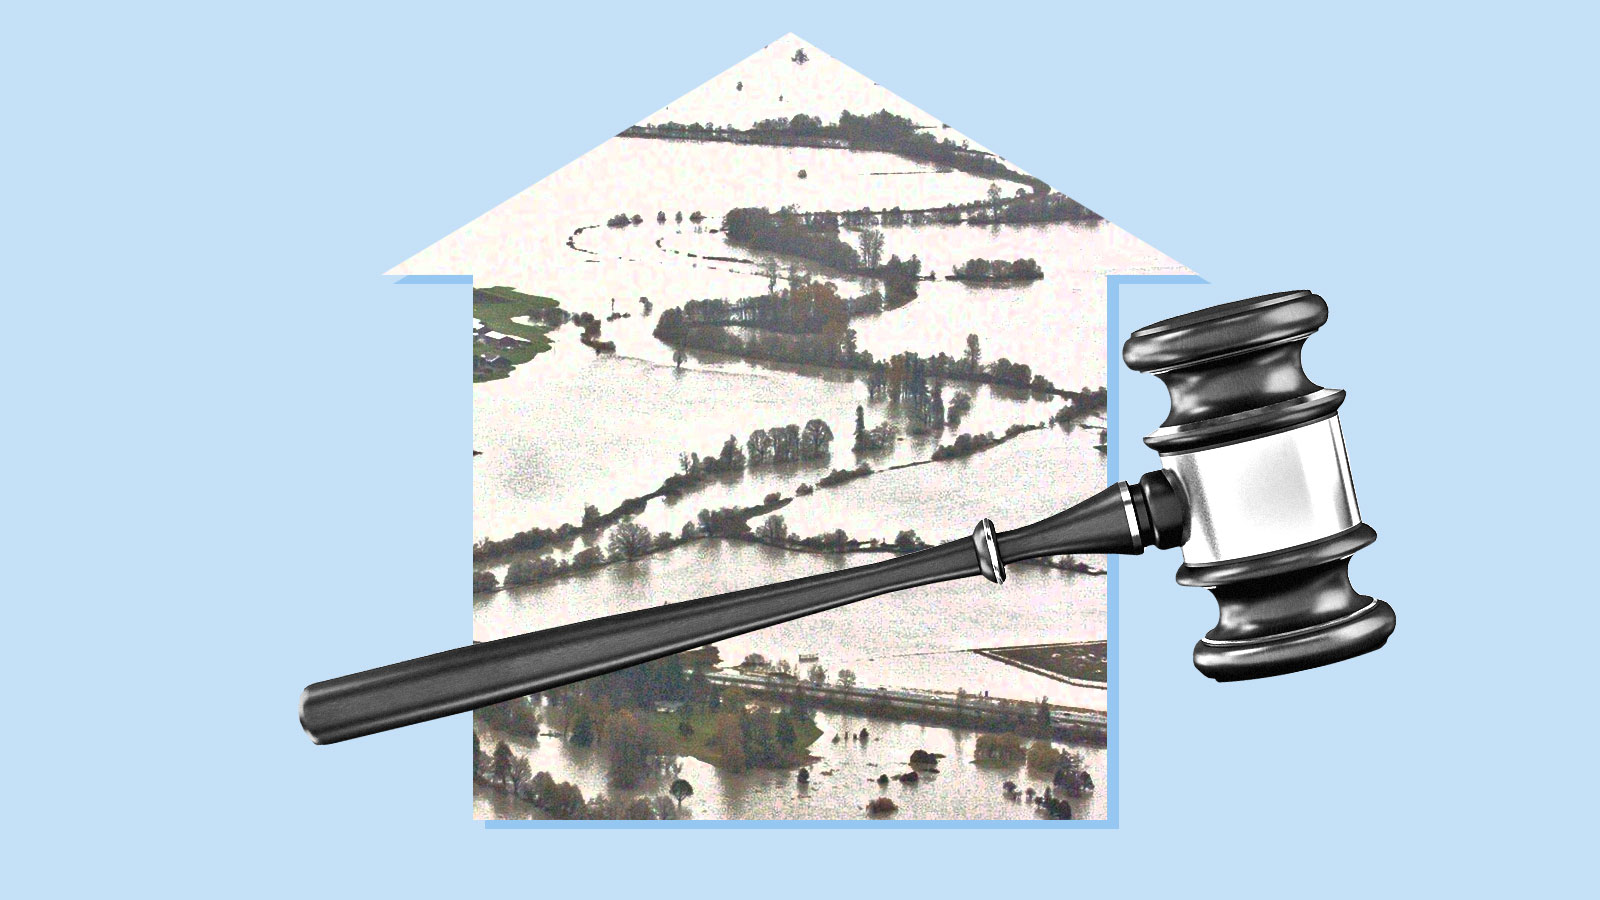 Flooded fields inside the shape of a house with a gavel on top